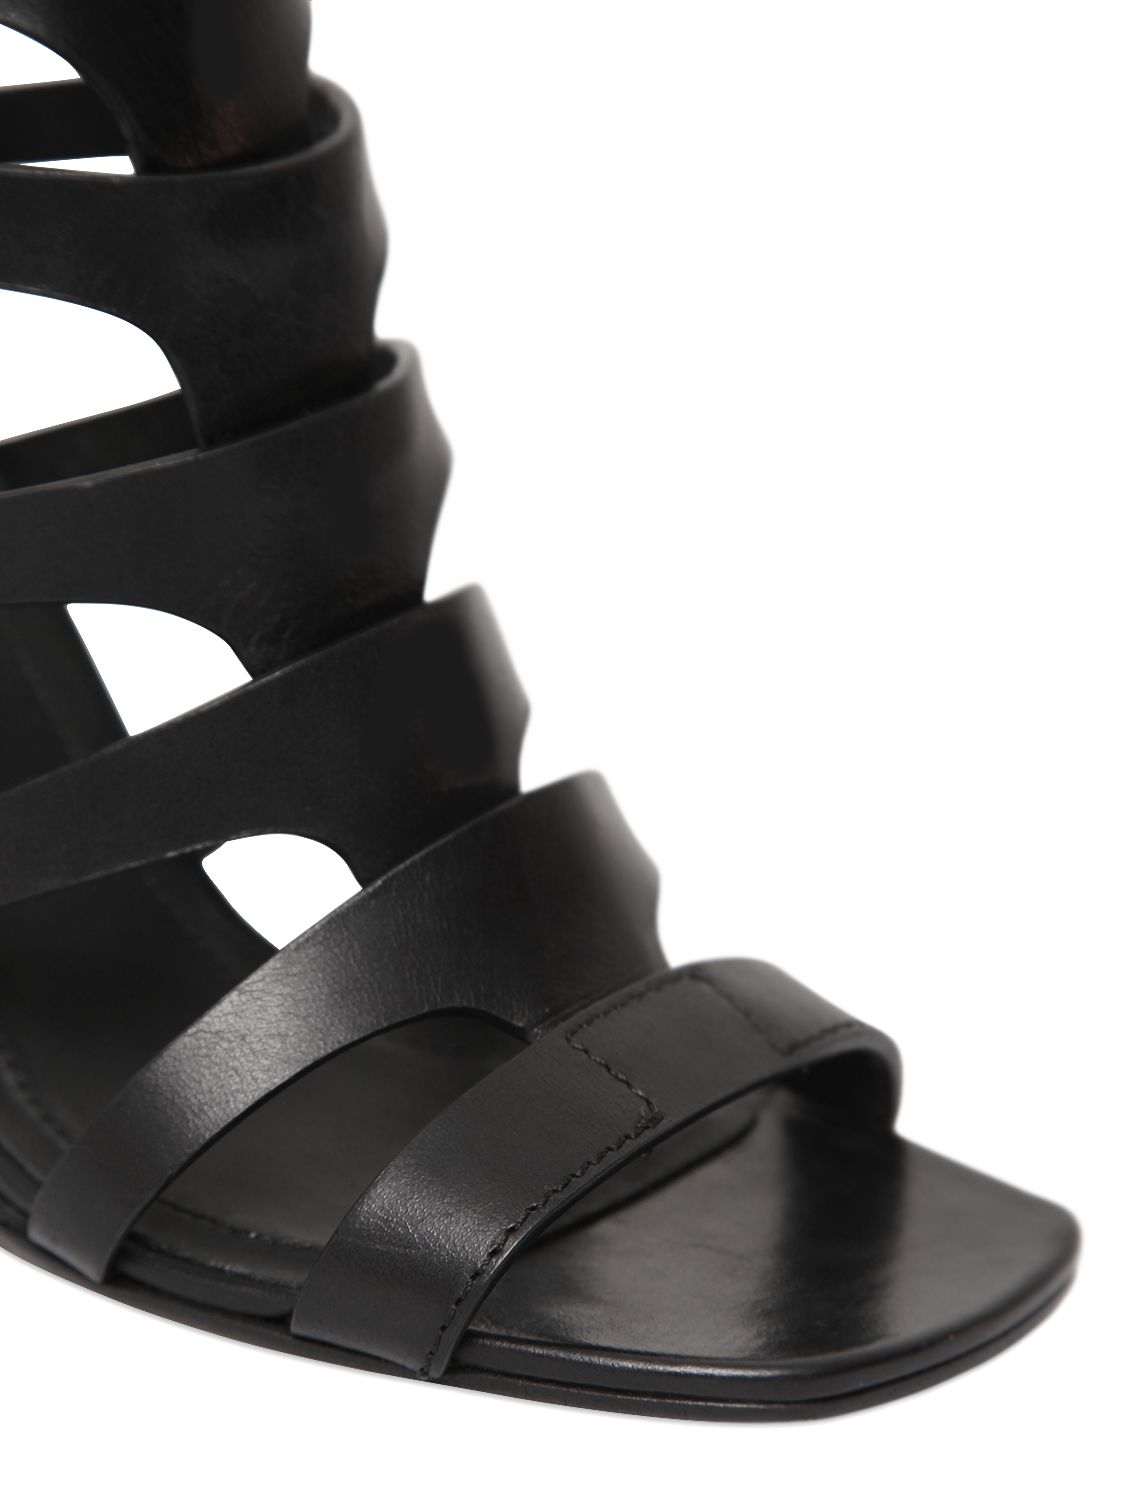 Lyst - Rick Owens 90mm Nautilus Leather Wedge Sandals in Black